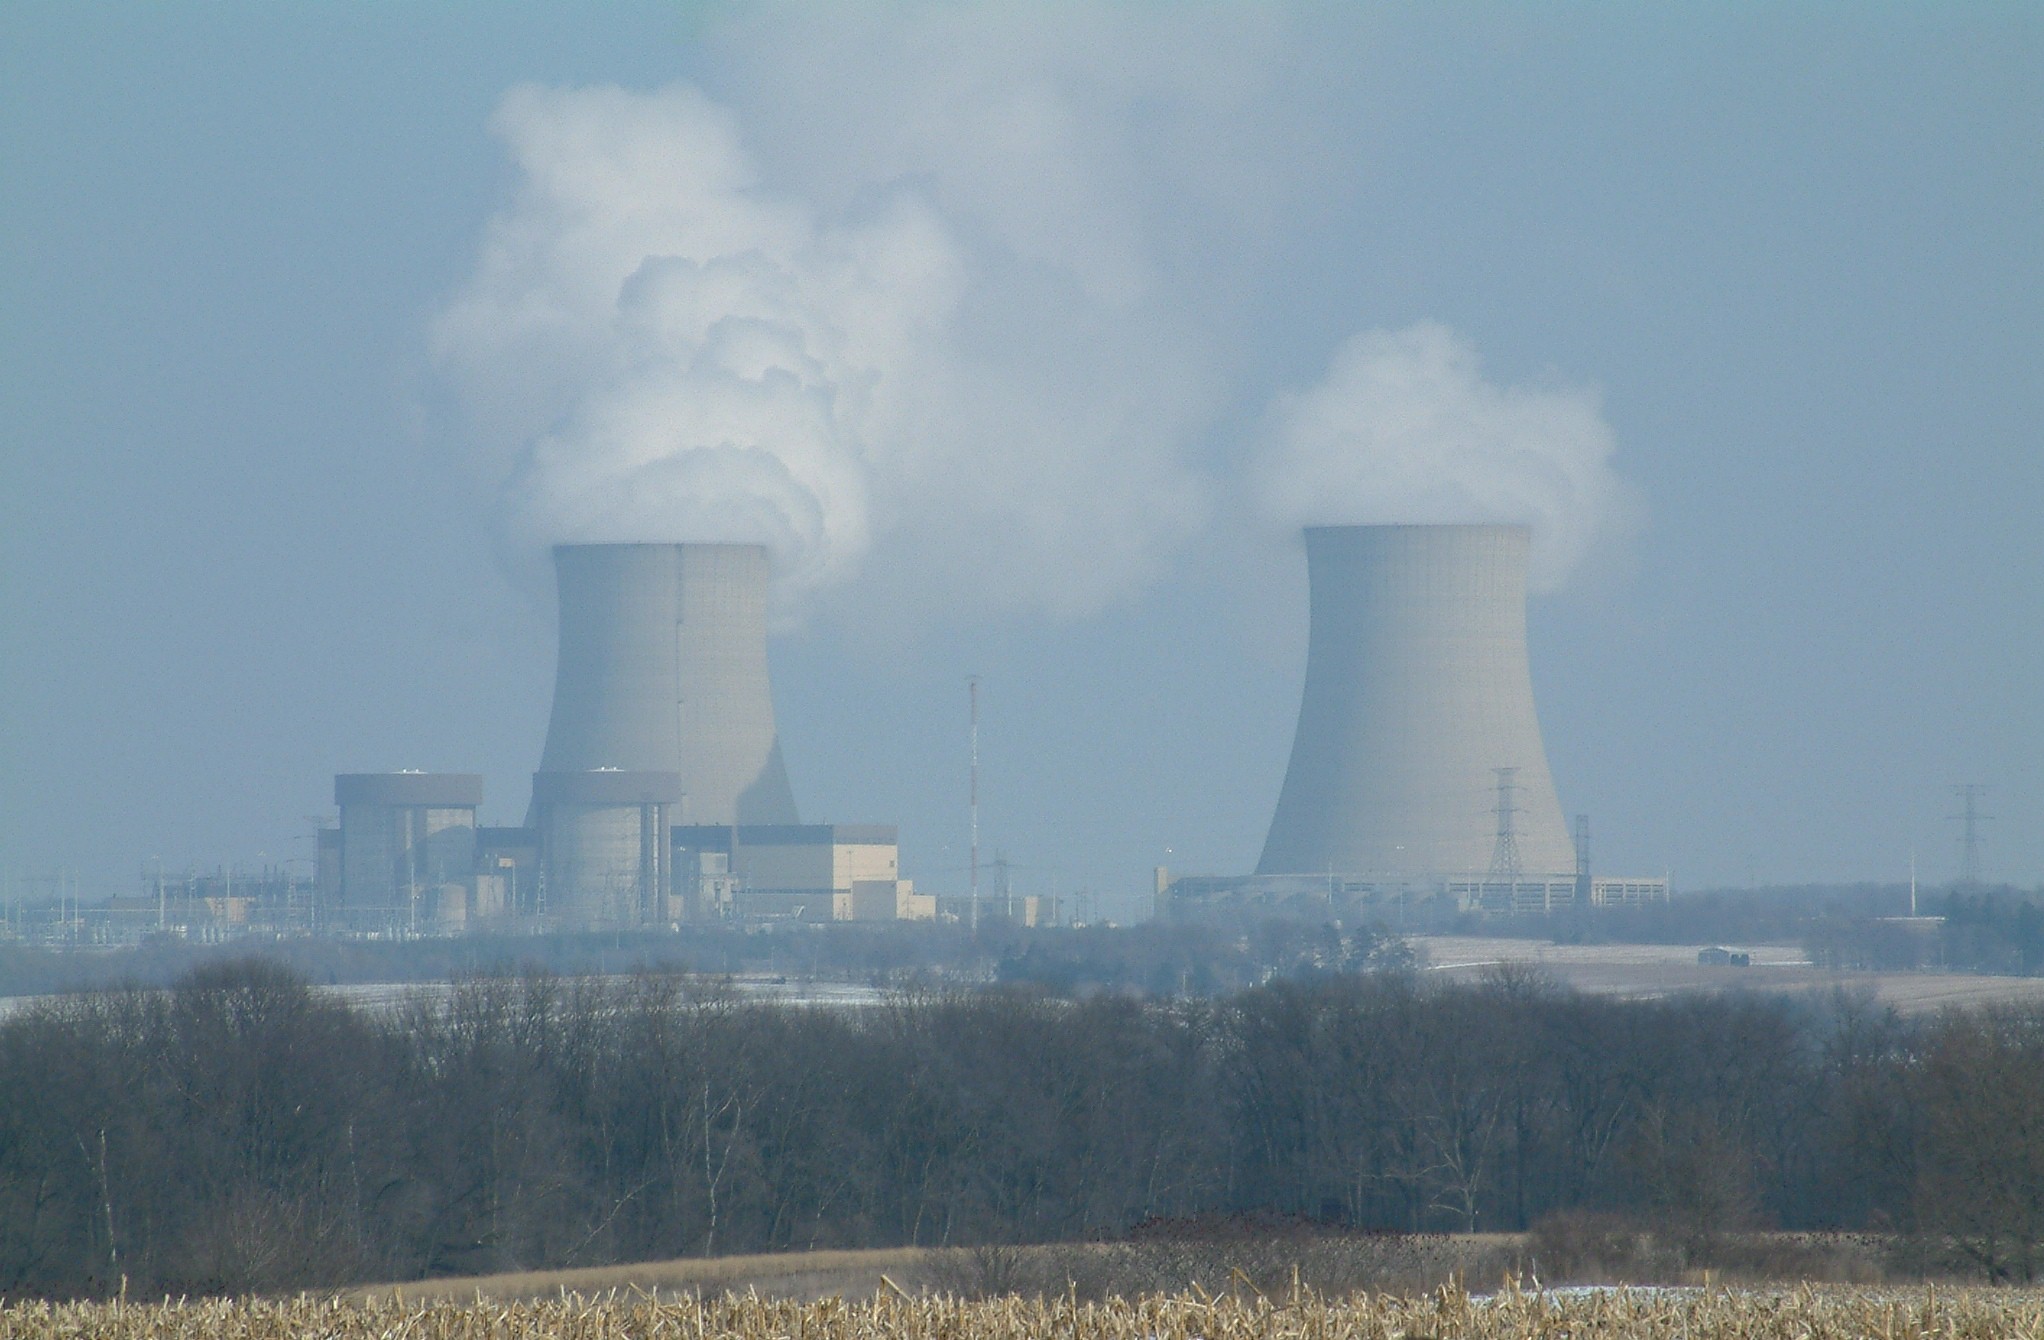 commonwealth-edison-nuclear-power-plant-at-byron-il-pics4learning